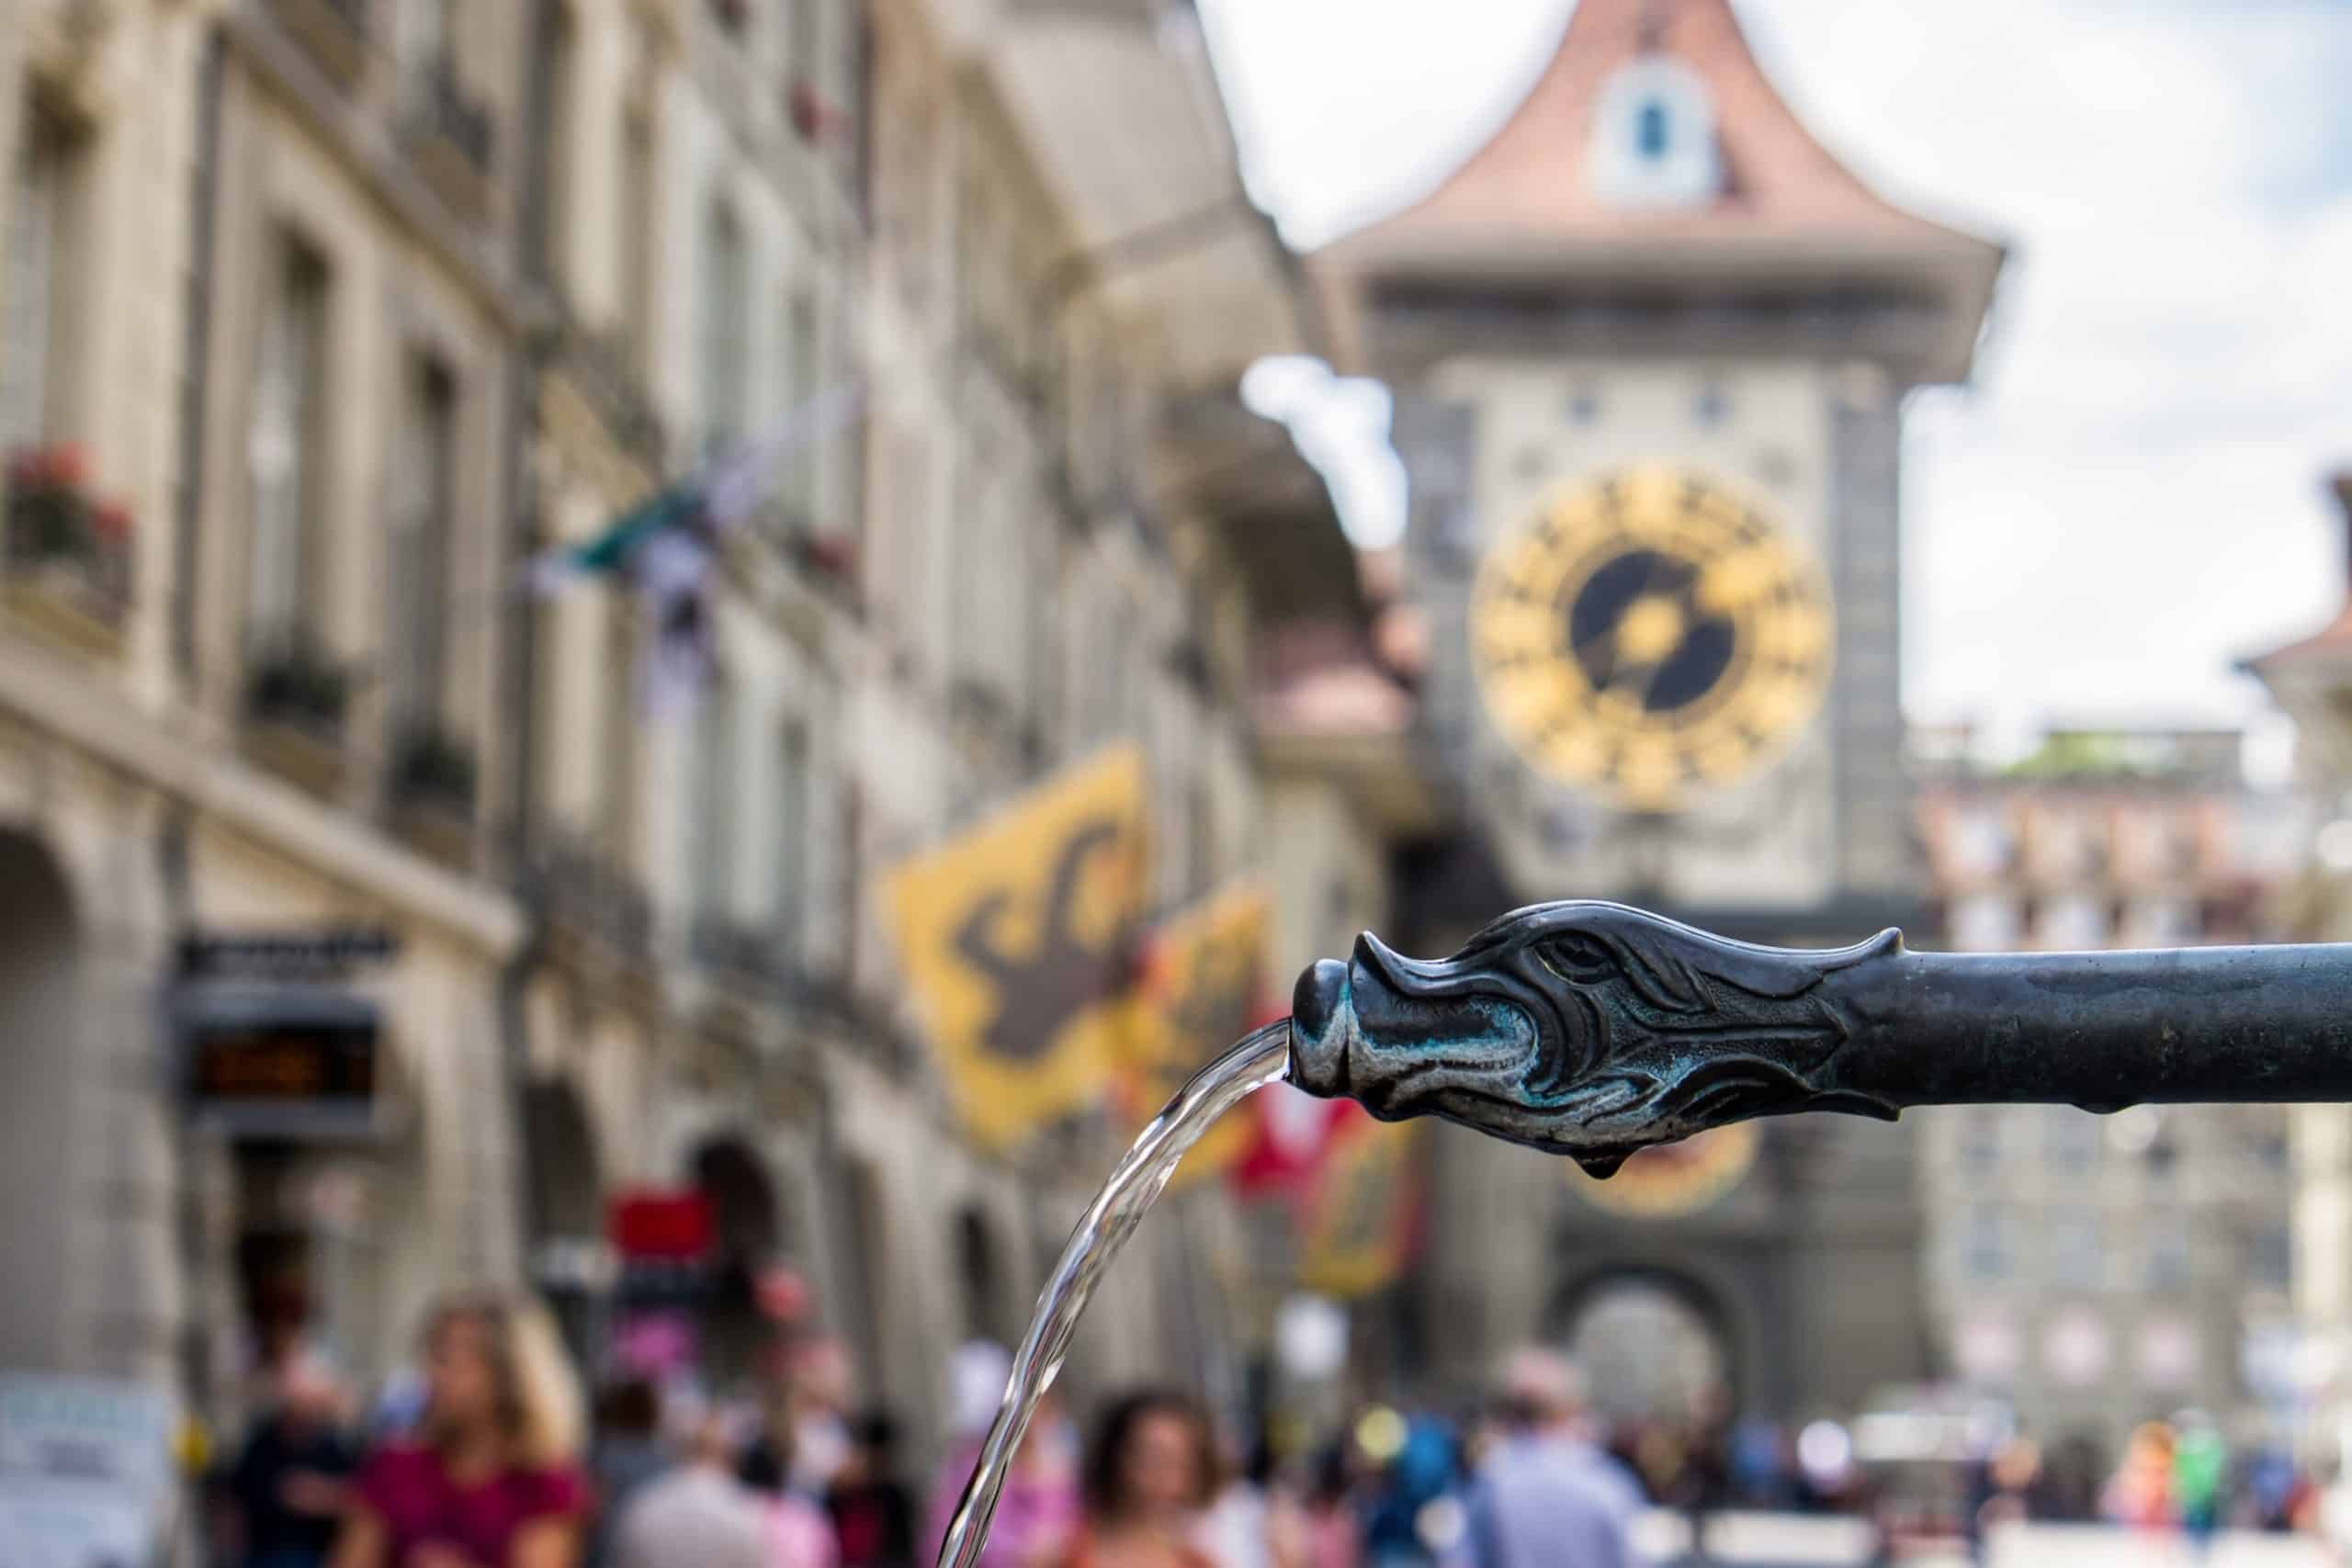 A black dragon-shaped fountain in Bern outside of the clocktower, one of many marking Switzerland's capital as the city of water